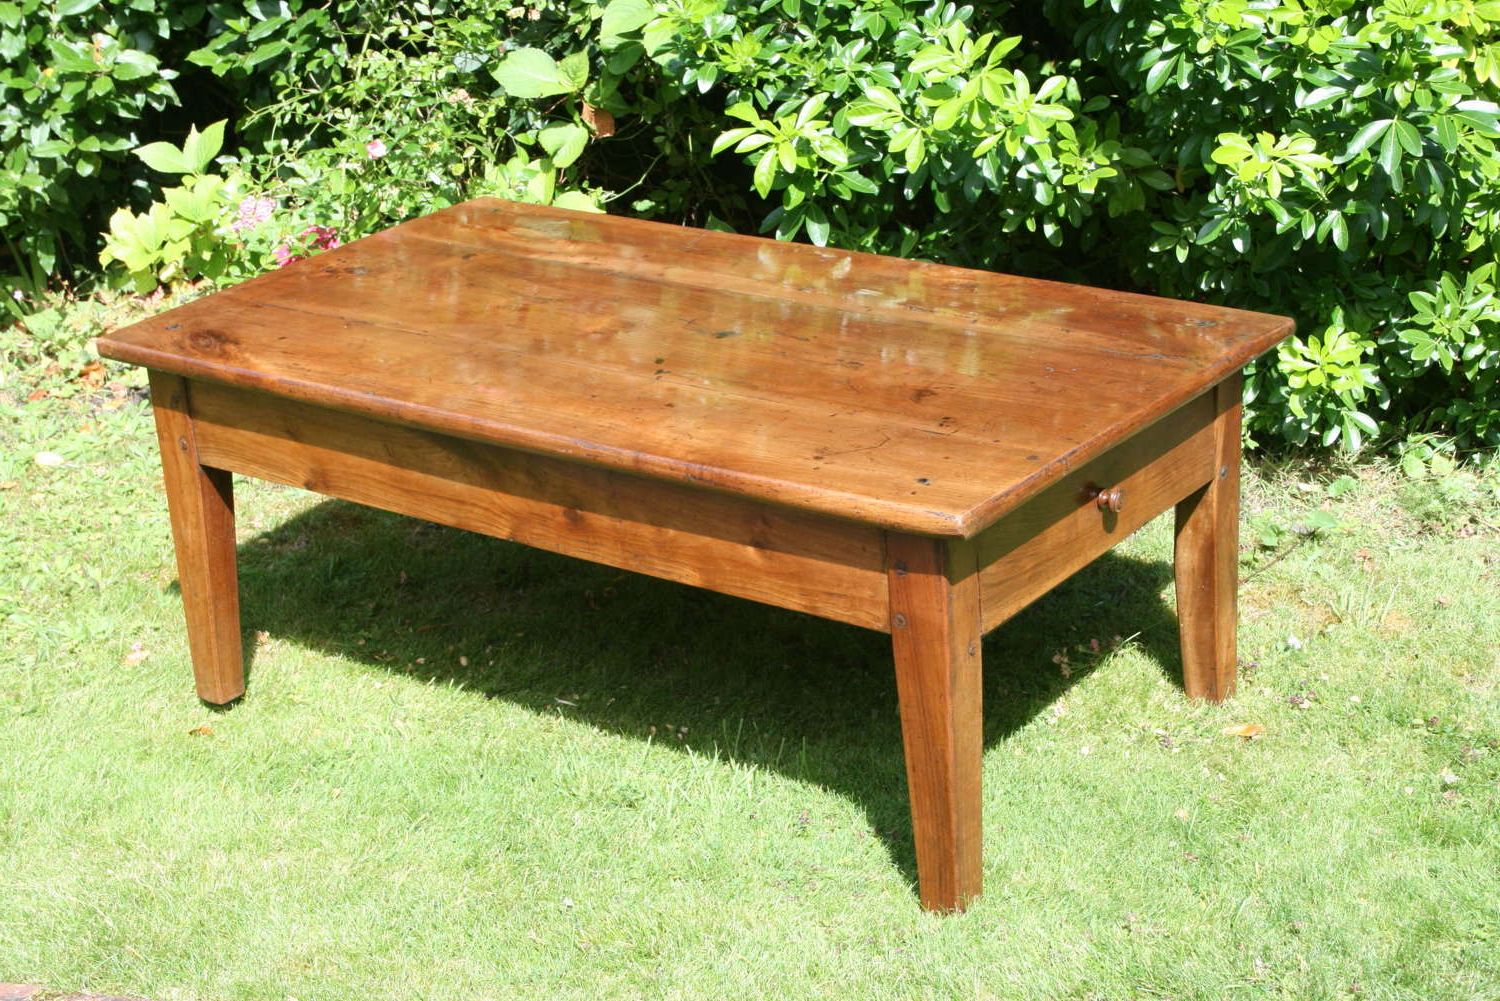 French Cherry Wood Coffee Table In Most Recent Heartwood Cherry Wood Coffee Tables (Gallery 9 of 20)